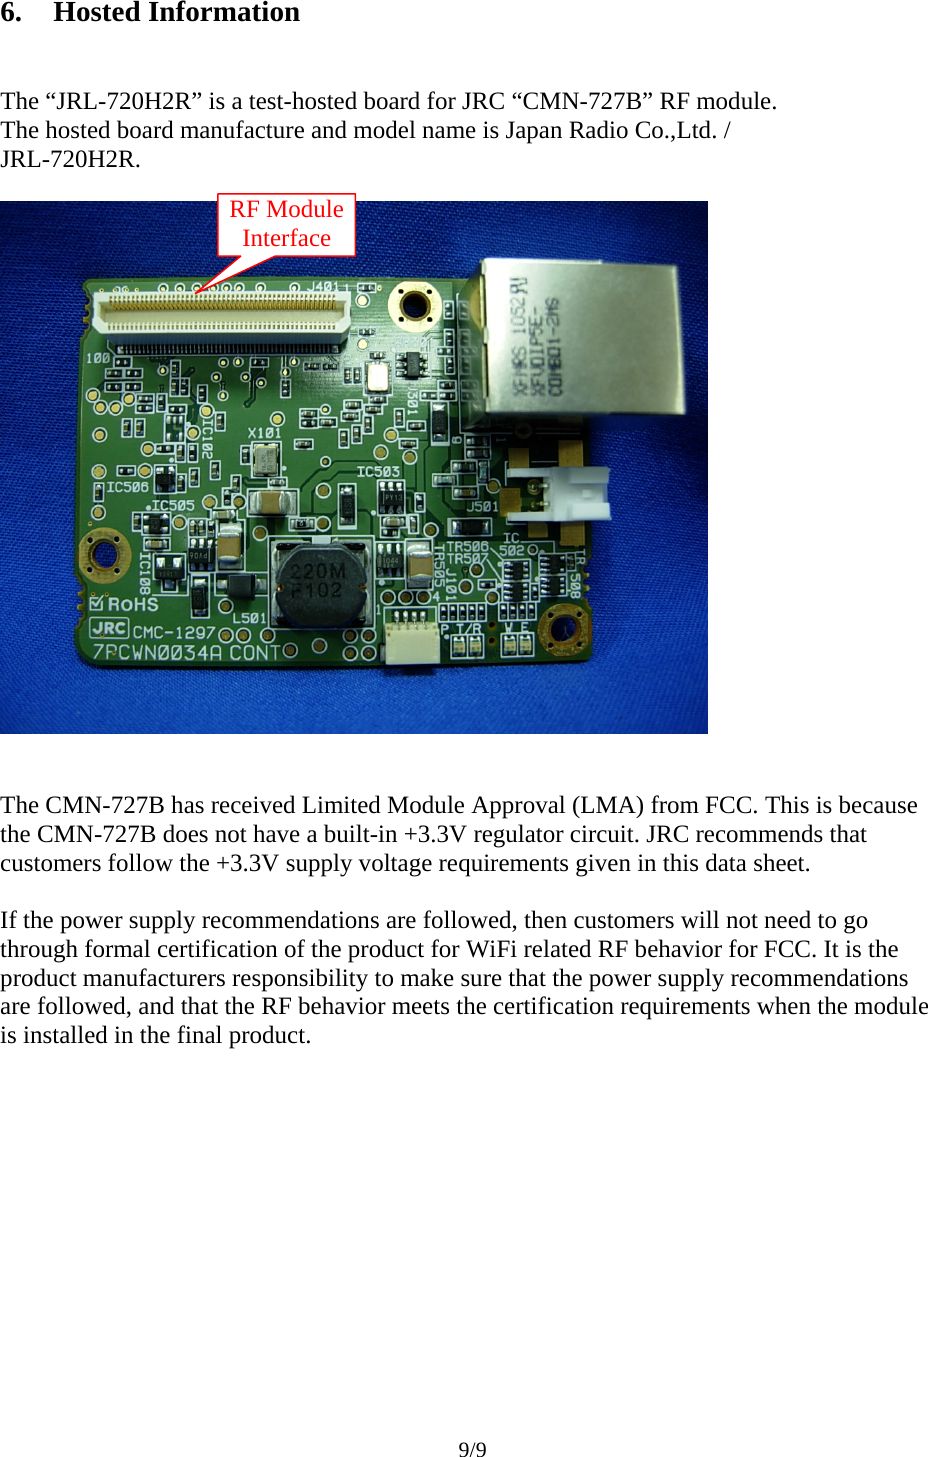 9/9  6. Hosted Information  The “JRL-720H2R” is a test-hosted board for JRC “CMN-727B” RF module. The hosted board manufacture and model name is Japan Radio Co.,Ltd. / JRL-720H2R.     The CMN-727B has received Limited Module Approval (LMA) from FCC. This is because the CMN-727B does not have a built-in +3.3V regulator circuit. JRC recommends that customers follow the +3.3V supply voltage requirements given in this data sheet.  If the power supply recommendations are followed, then customers will not need to go through formal certification of the product for WiFi related RF behavior for FCC. It is the product manufacturers responsibility to make sure that the power supply recommendations are followed, and that the RF behavior meets the certification requirements when the module is installed in the final product.   RF Module Interface 